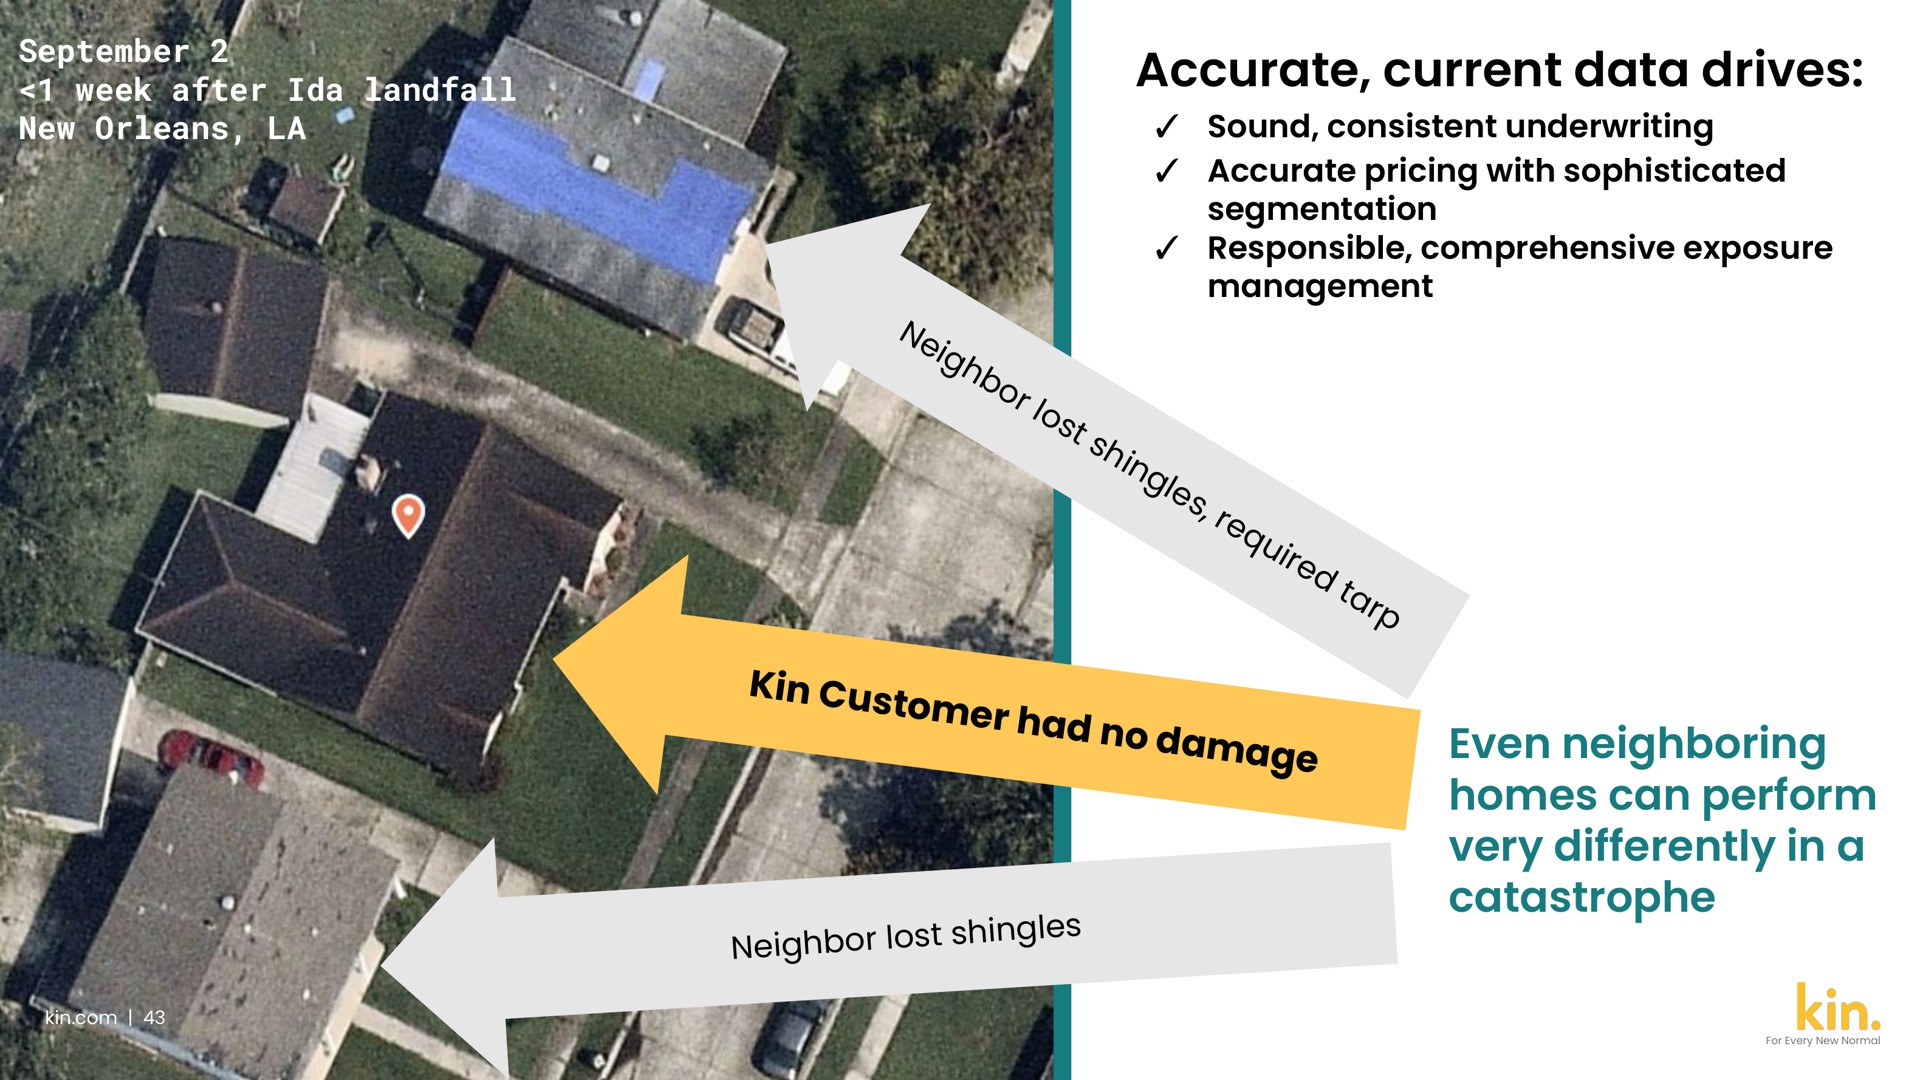 accurate current data drives even neighboring homes can perform very differently catastrophe | Kin